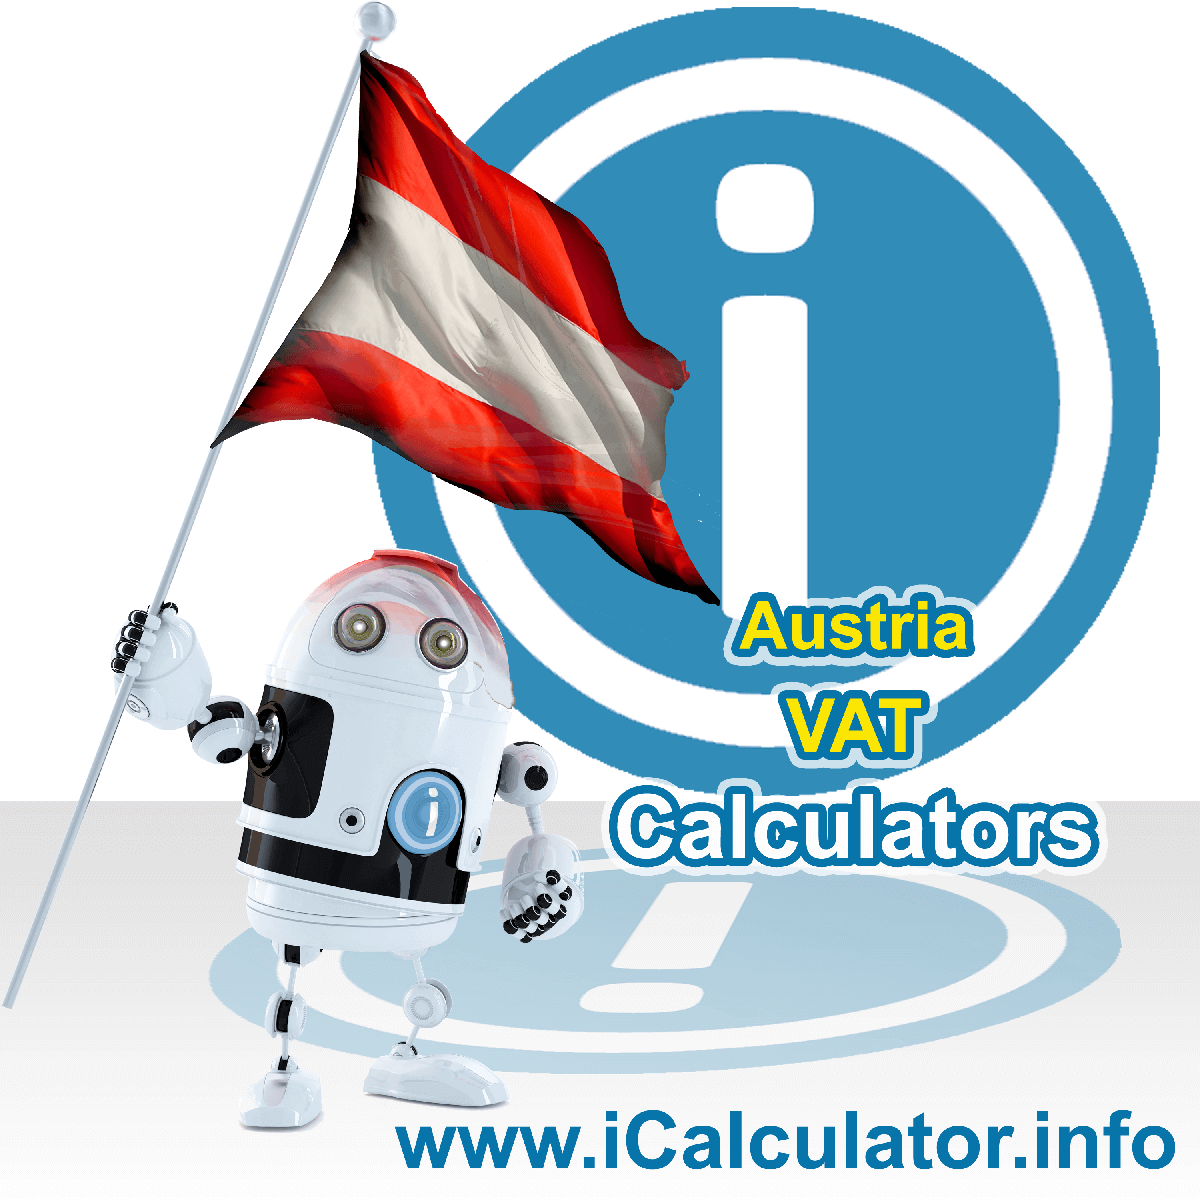 Austria VAT Calculator. This image shows the Austria flag and information relating to the VAT formula used for calculating Value Added Tax in Austria using the Austria VAT Calculator in 2023